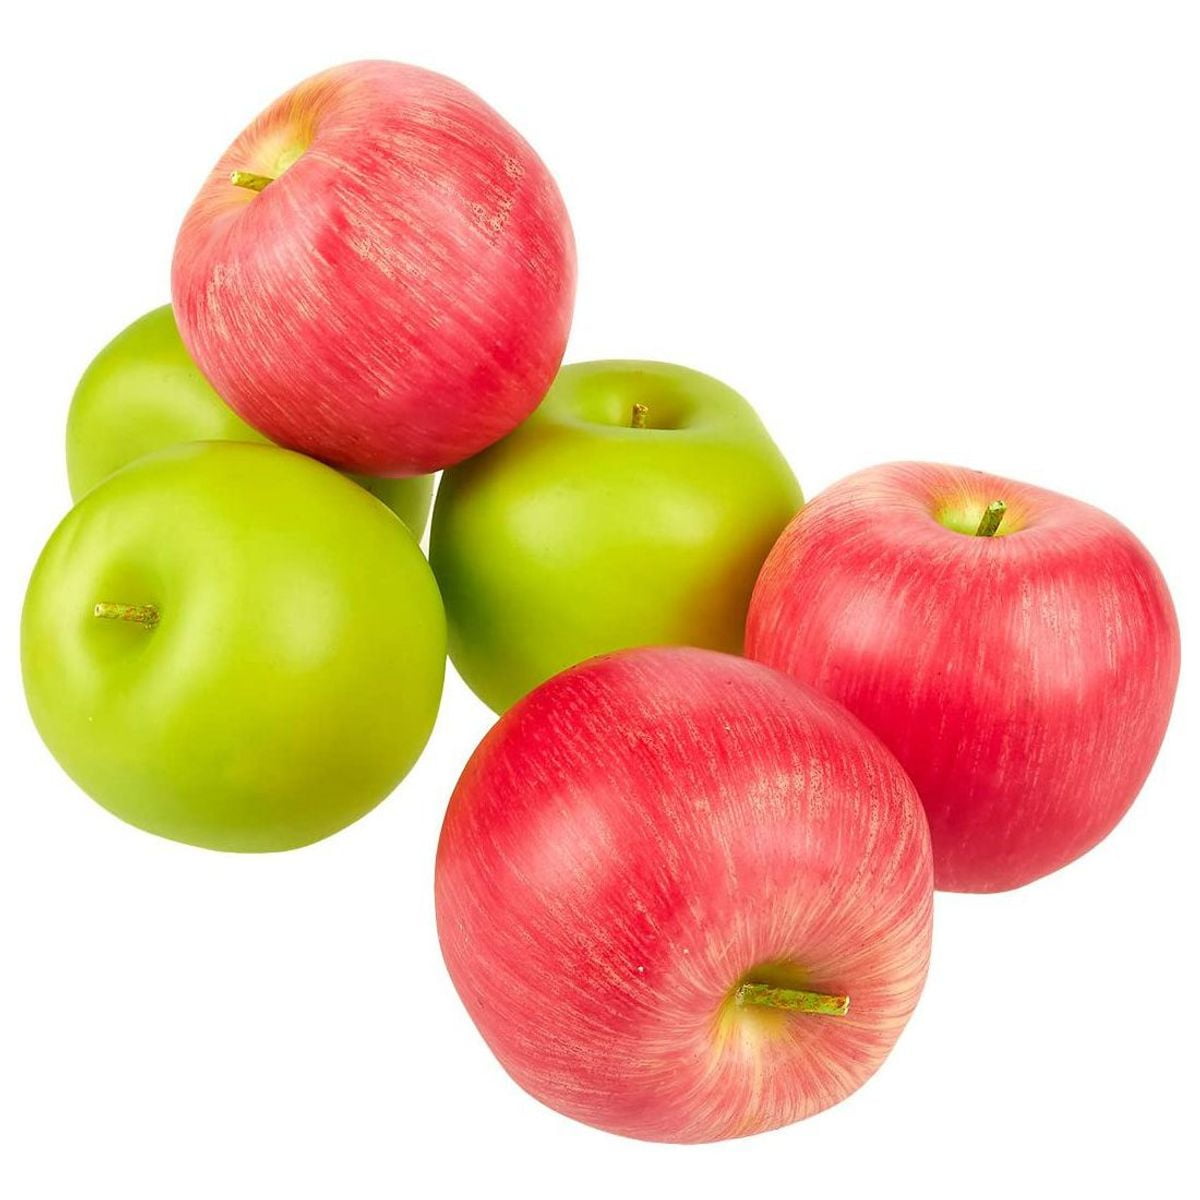 Artificial Fake Fruits Delicious Apples For Decoration Decorative Fruit 